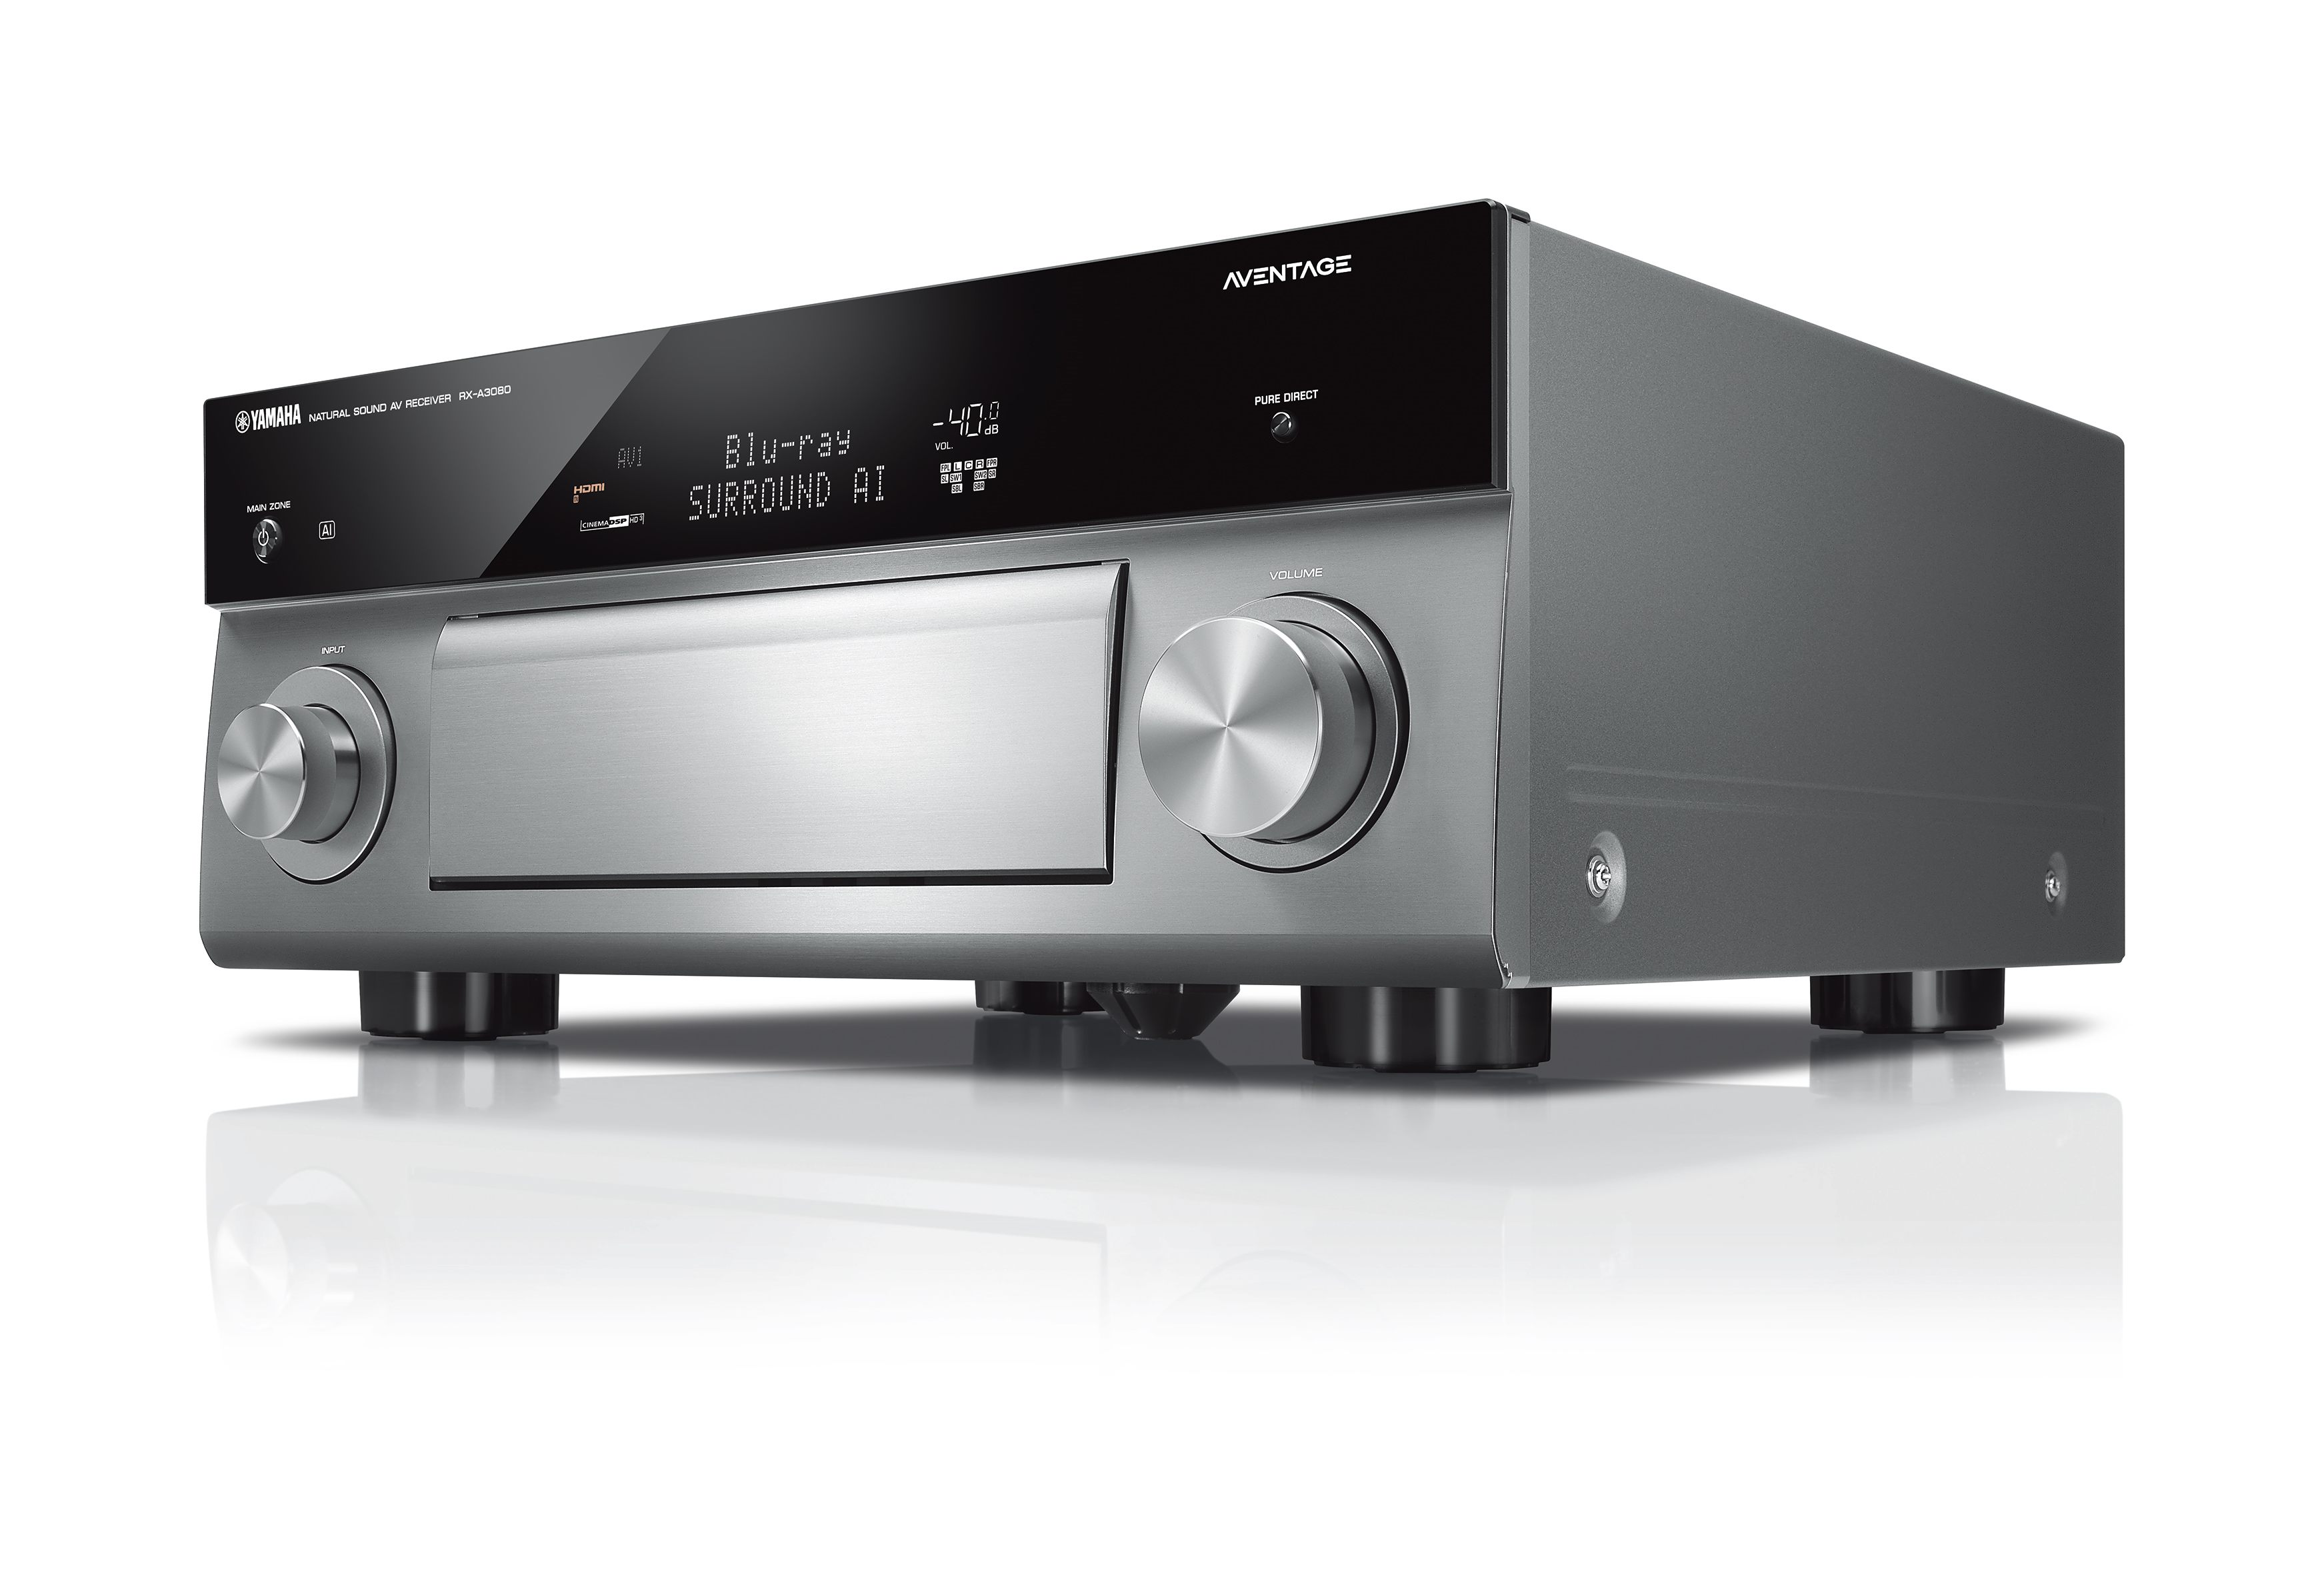 RX-A3080 - Overview - AV Receivers - Audio & Visual - Products 